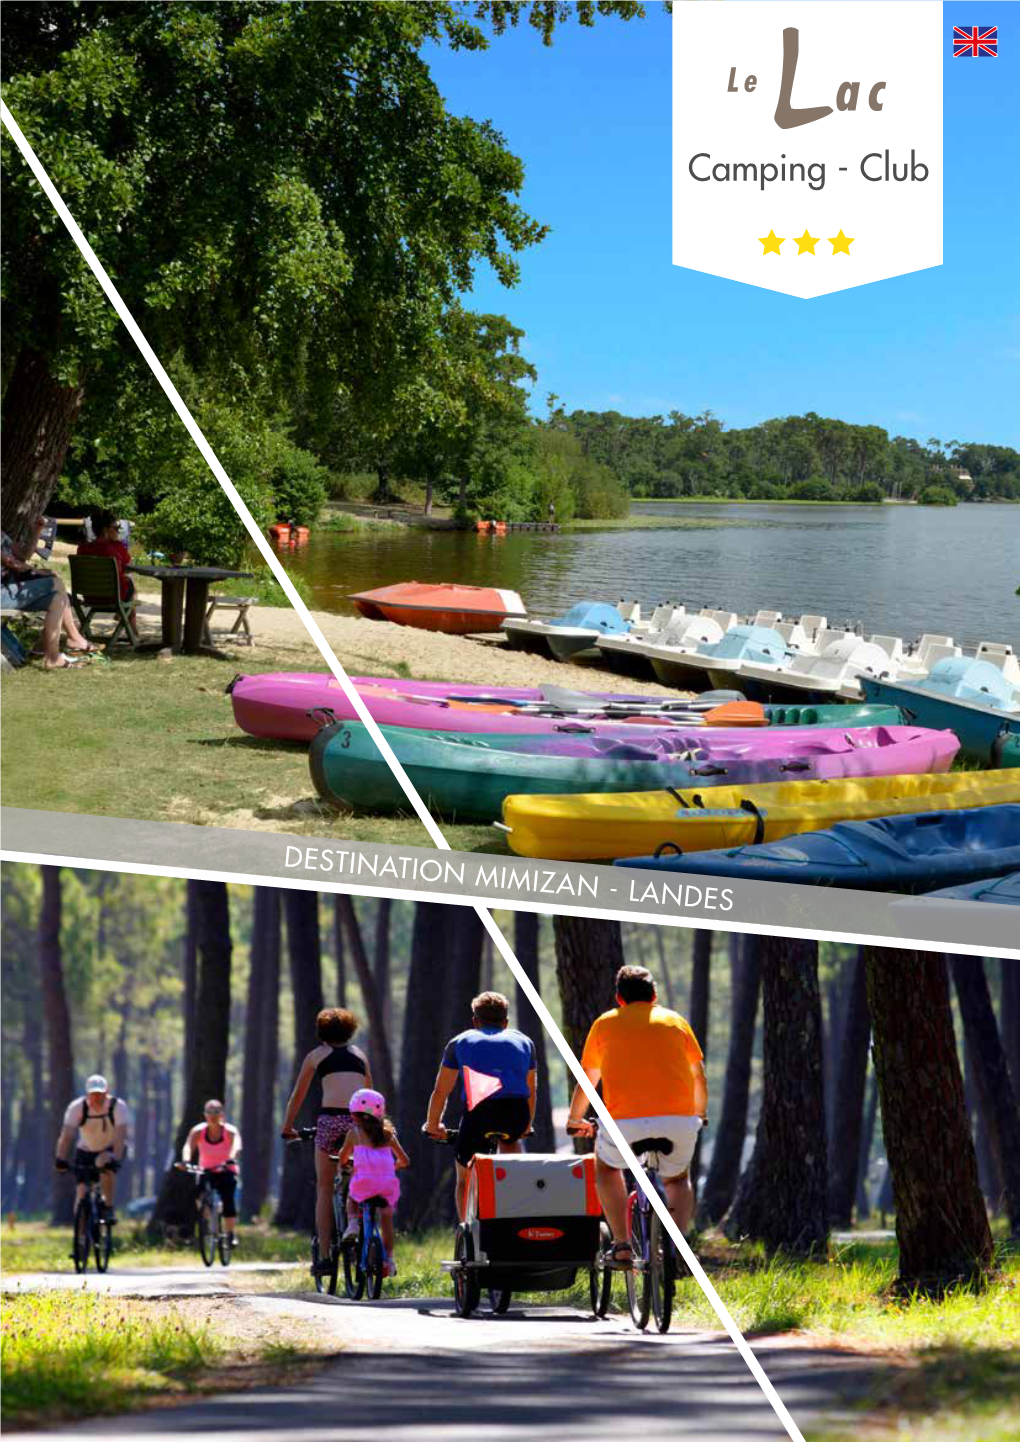 DESTINATION MIMIZAN - LANDES on the Banks of the Lake, Near the Center City of Mimizan, Our Campground Welcomes You to a Calm and Natural Environment